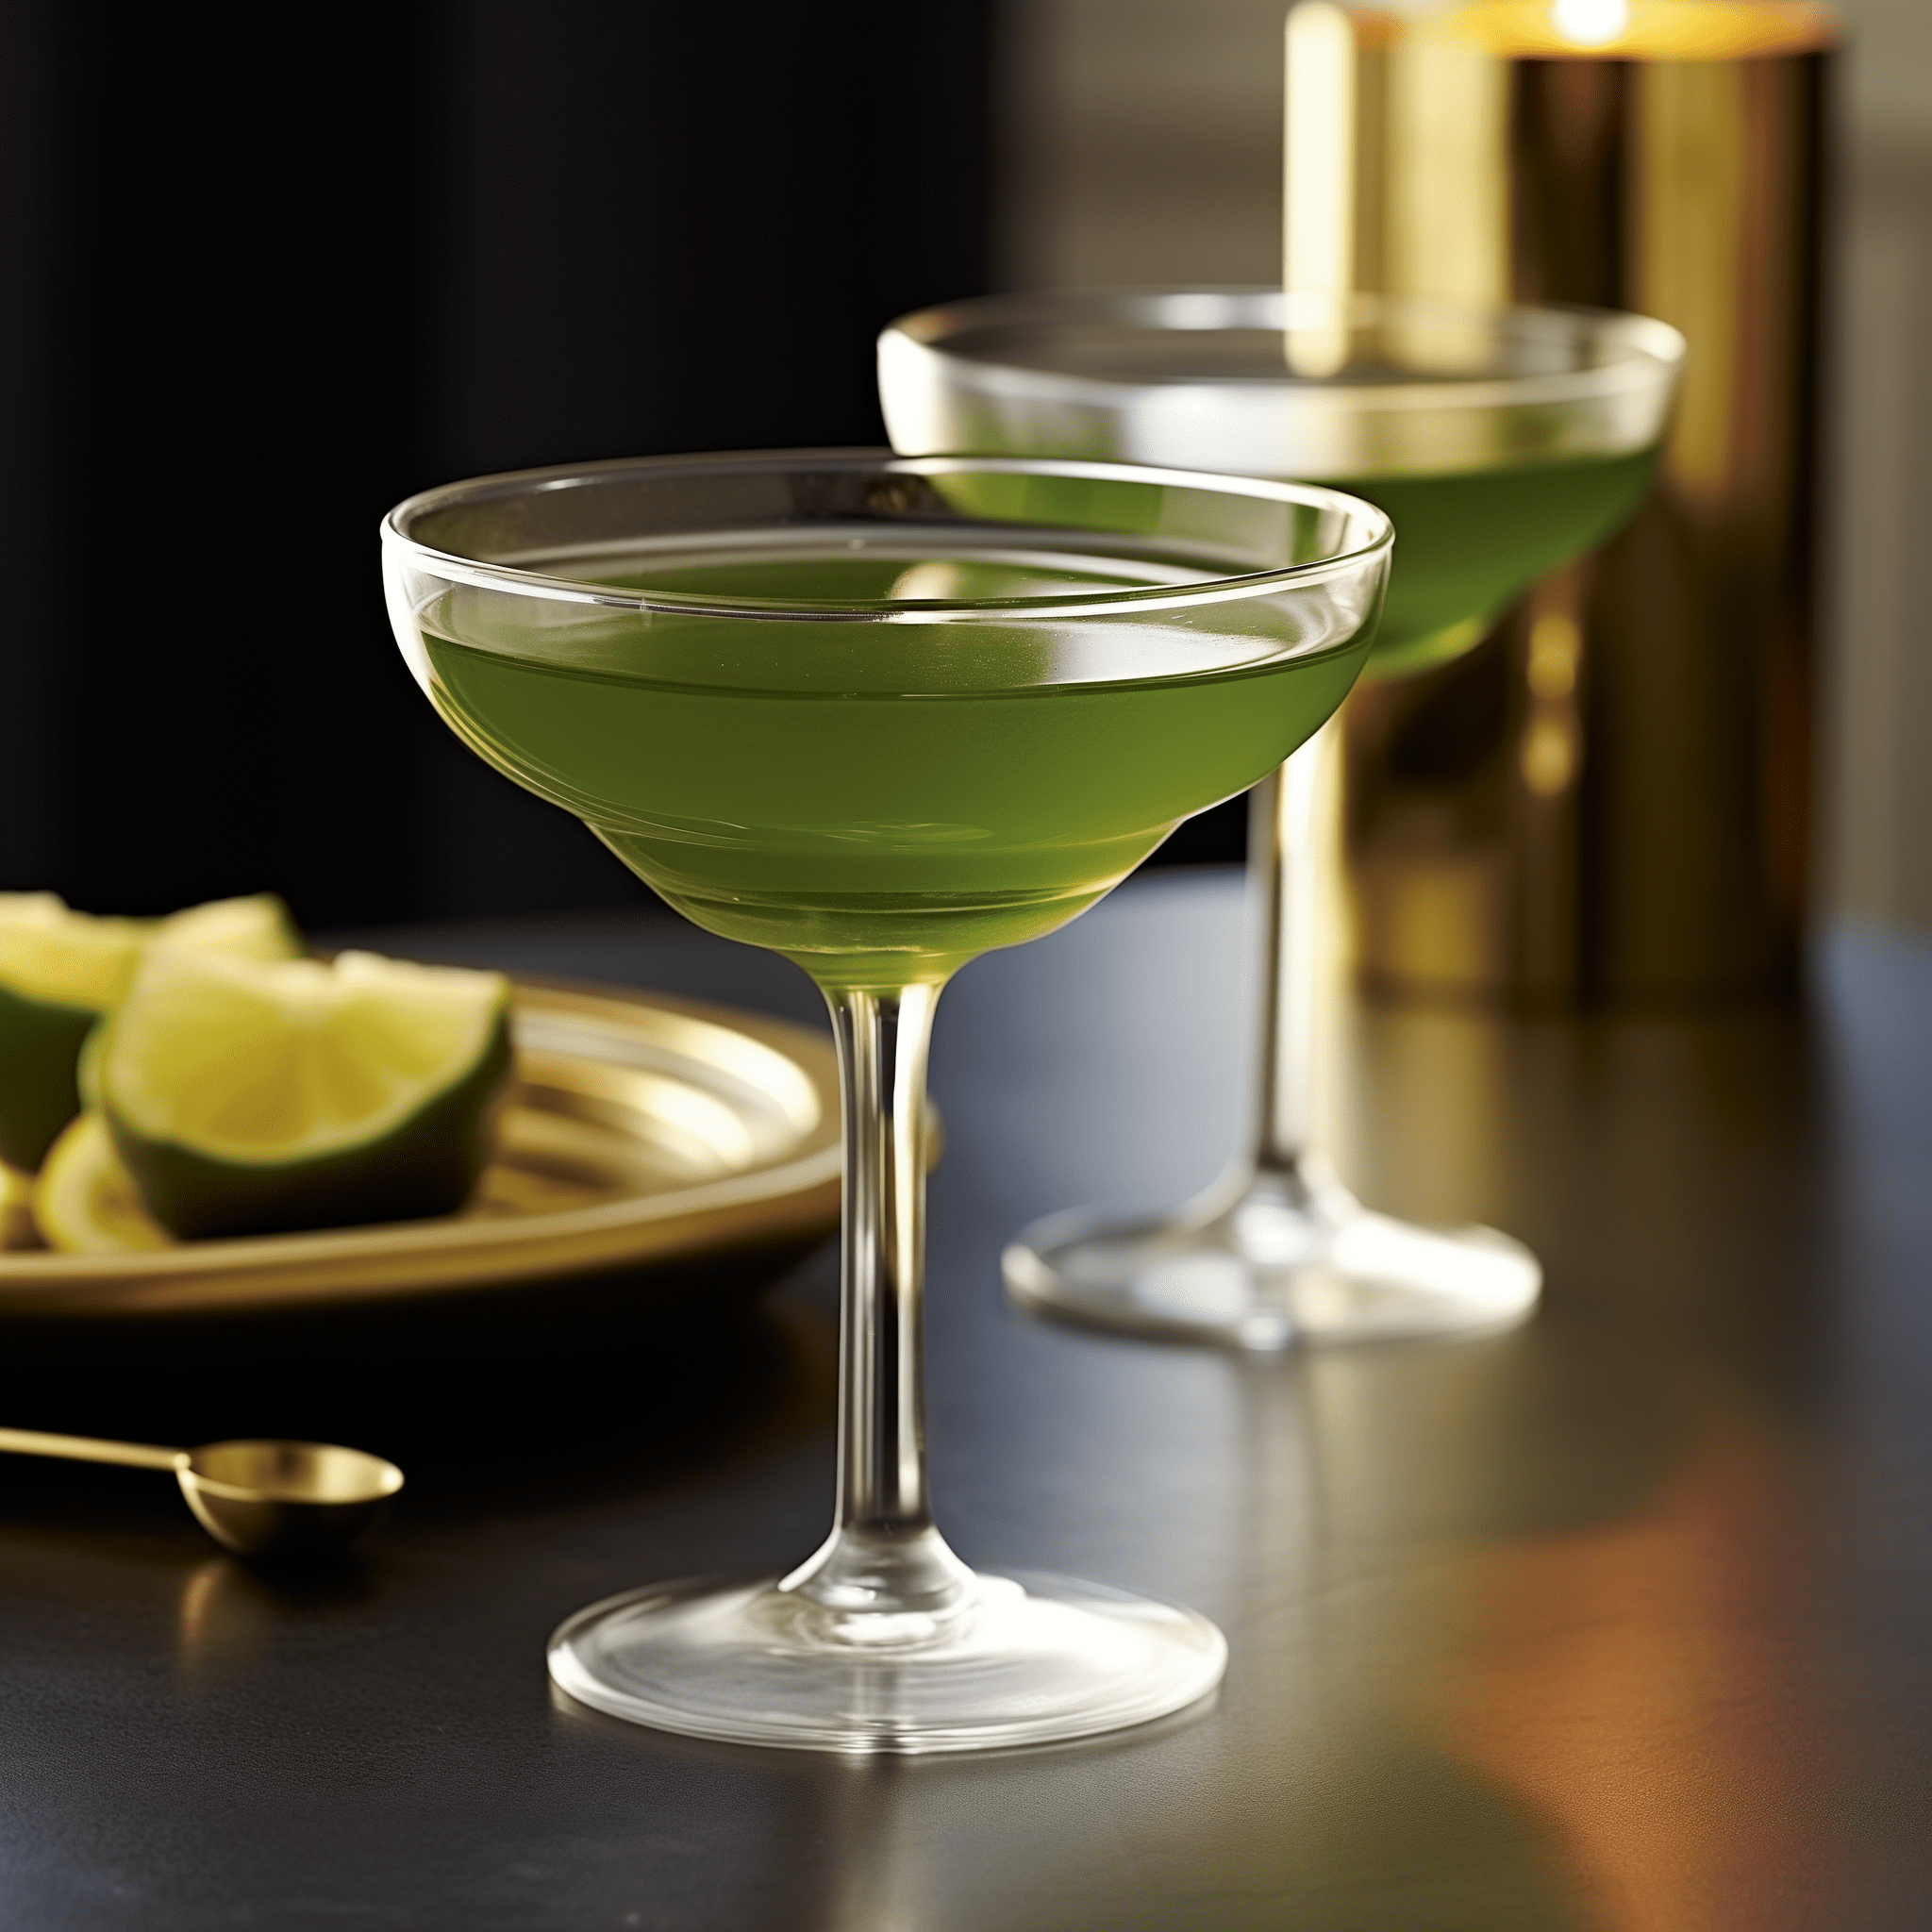 Tailspin Cocktail Recipe - The Tailspin is a symphony of flavors, with a bold, herbaceous punch from the Green Chartreuse, balanced by the sweet, fortified notes of the sweet vermouth, and the clean, juniper-led profile of dry gin. It's complex, slightly bitter, and aromatic.